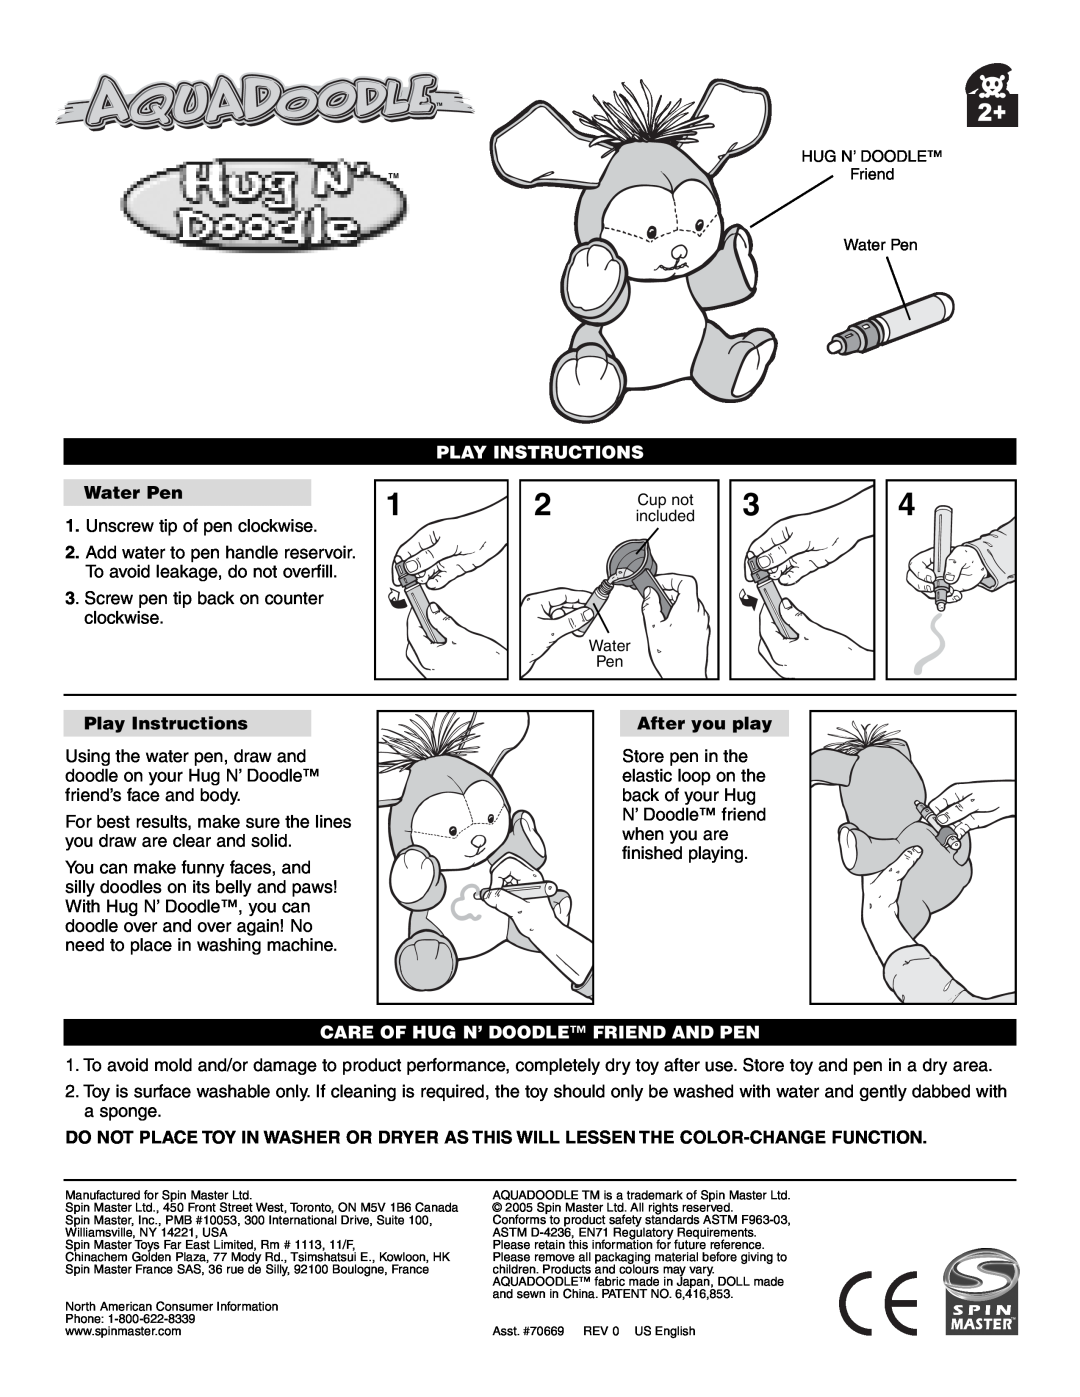 Spin Master 70669, Hug n' Doodle manual Water Pen, Play Instructions, After you play, Care Of Hug N’ Doodle Friend And Pen 